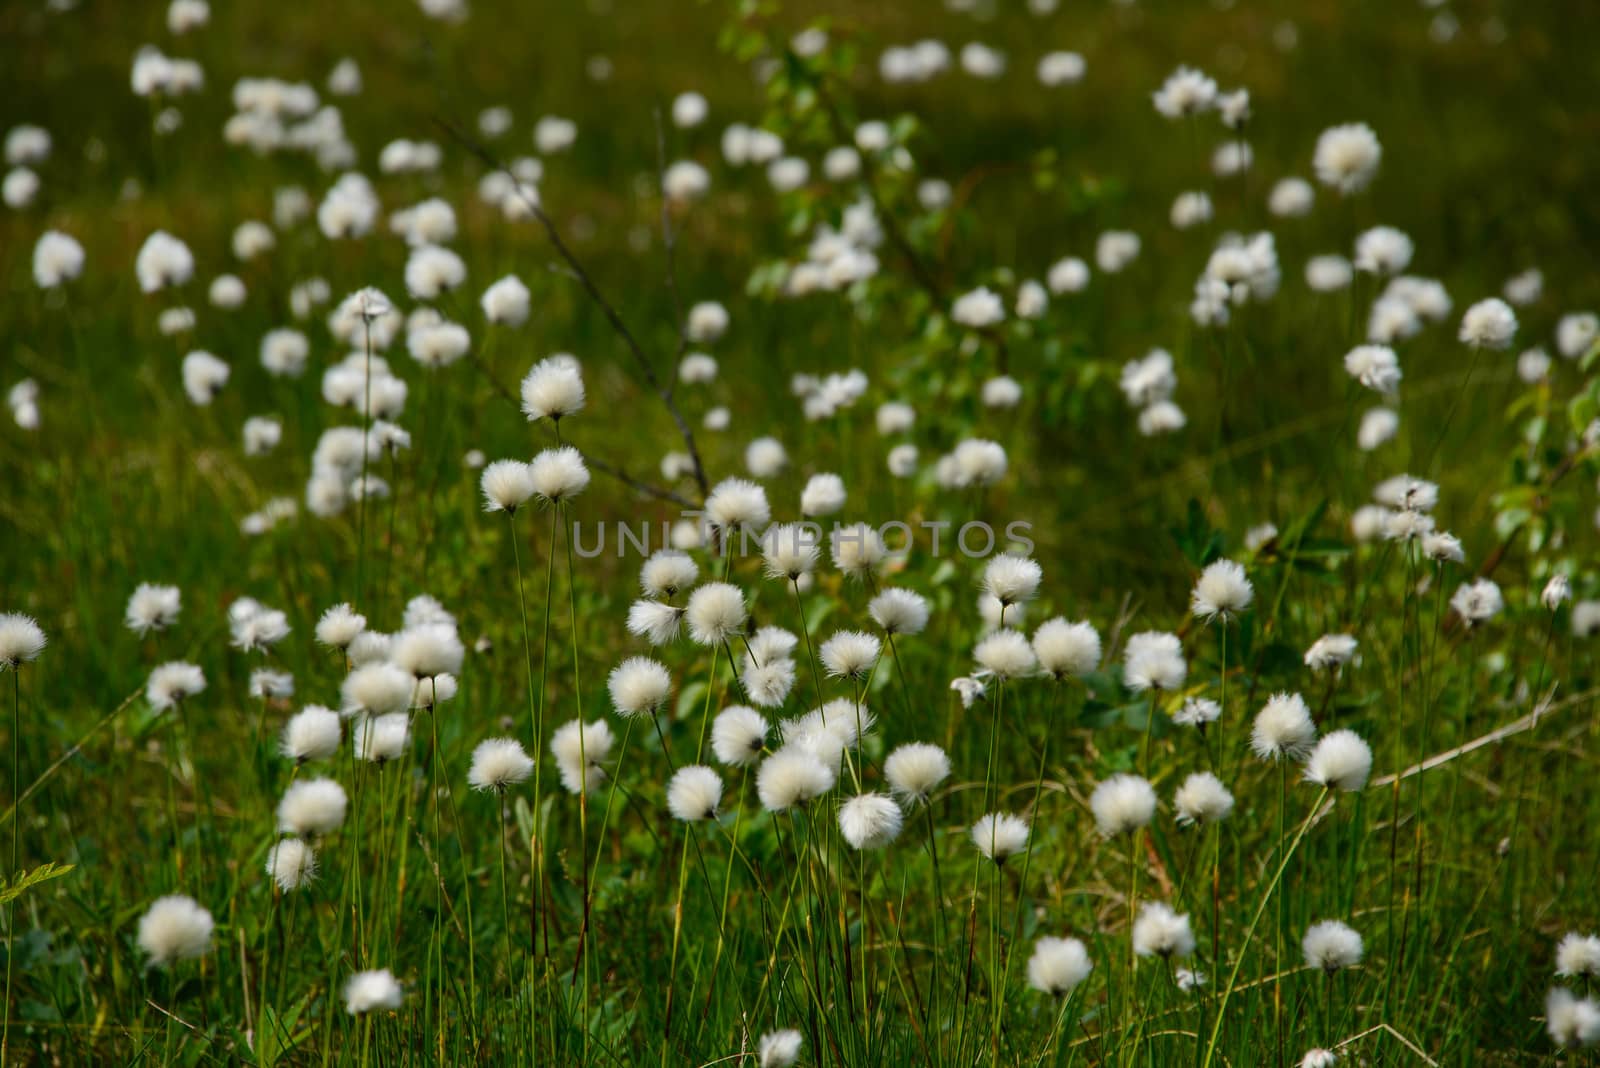 Cotton grass by GryT